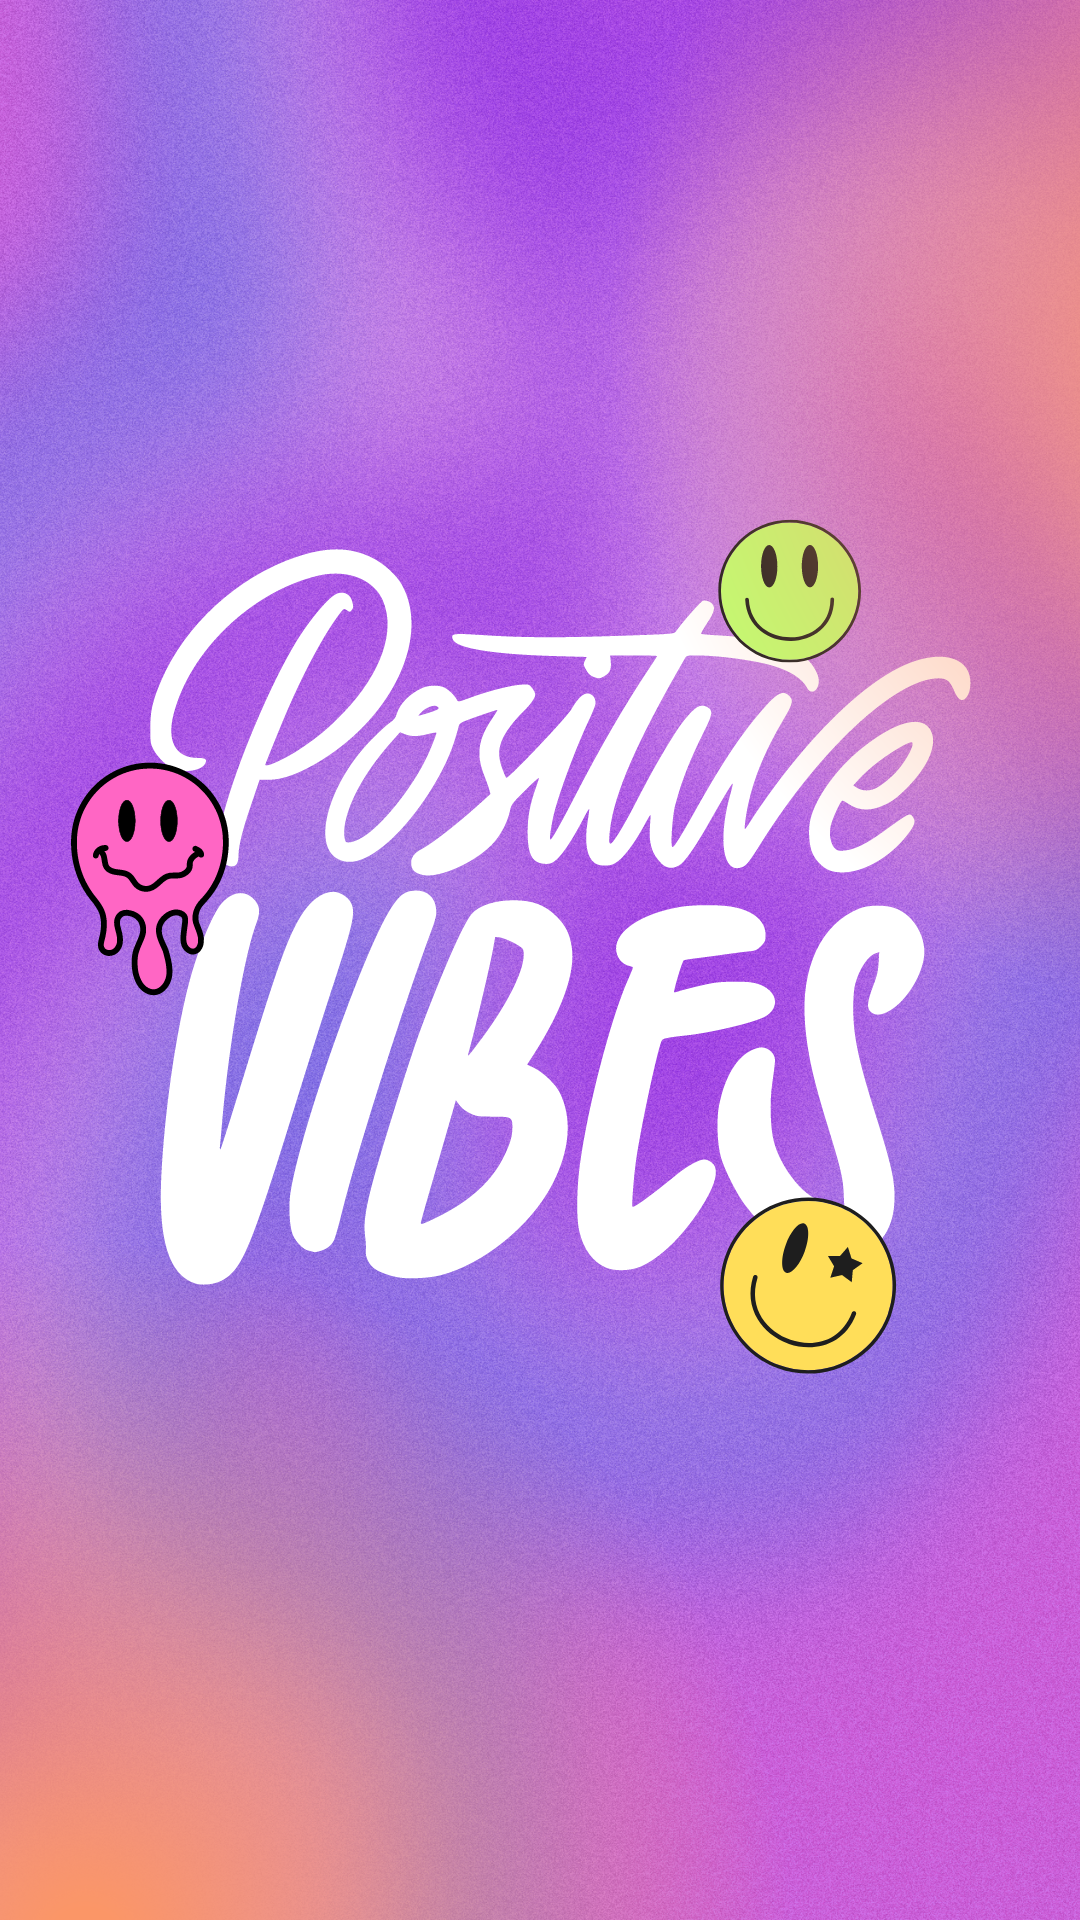 image with the words "positive vibes" and smiley faces